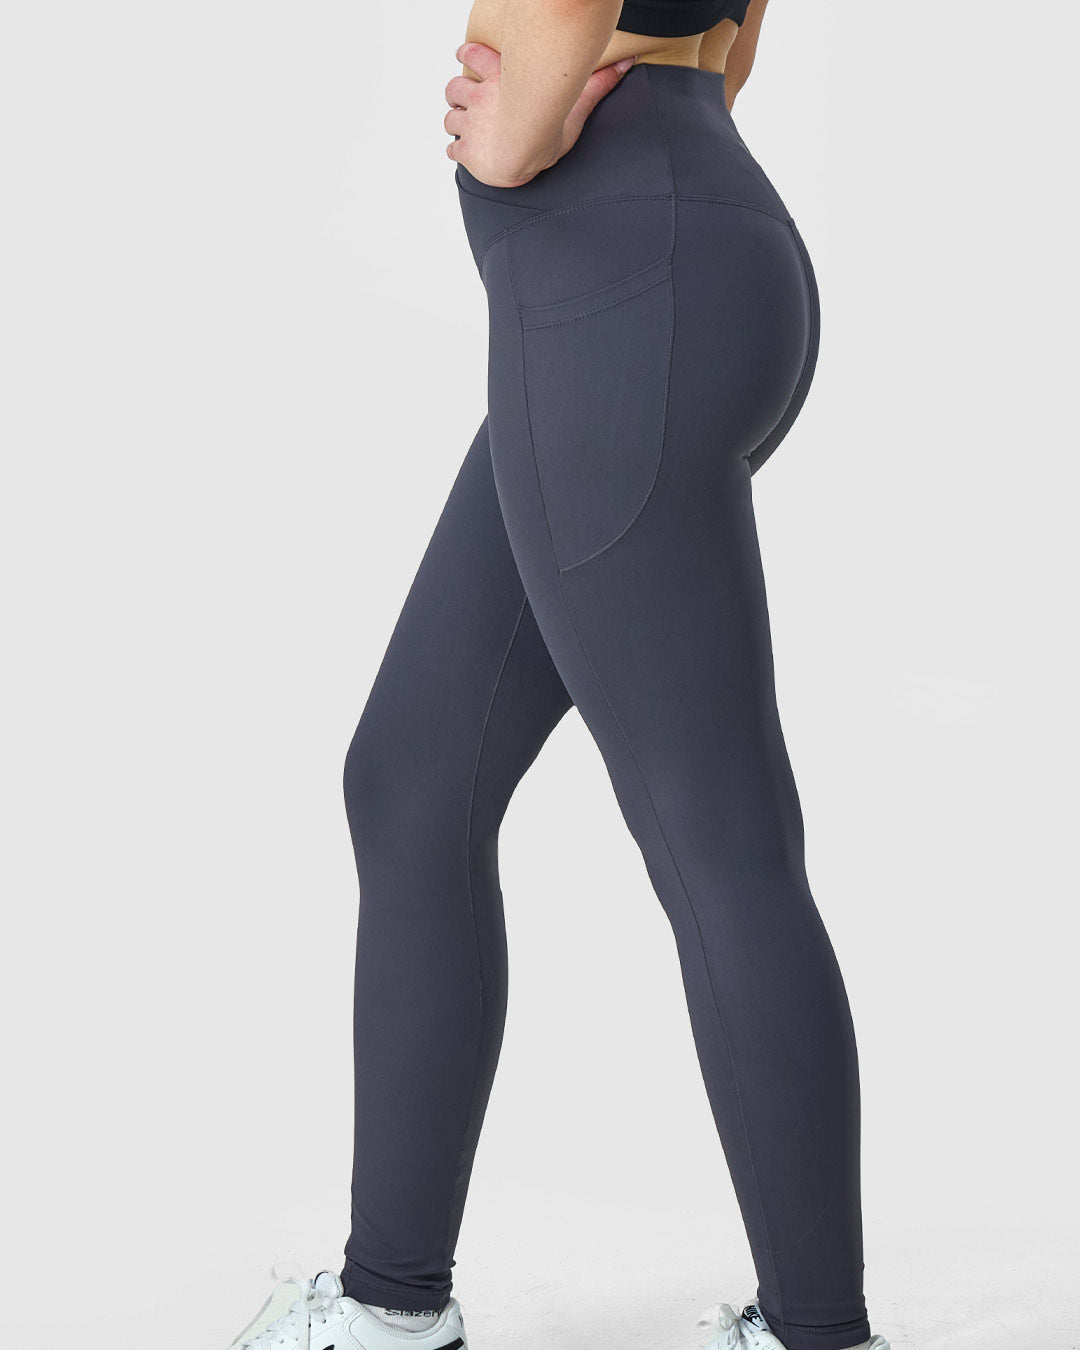 leggings, grey yoga pants with pockets and made of buttery soft fabric